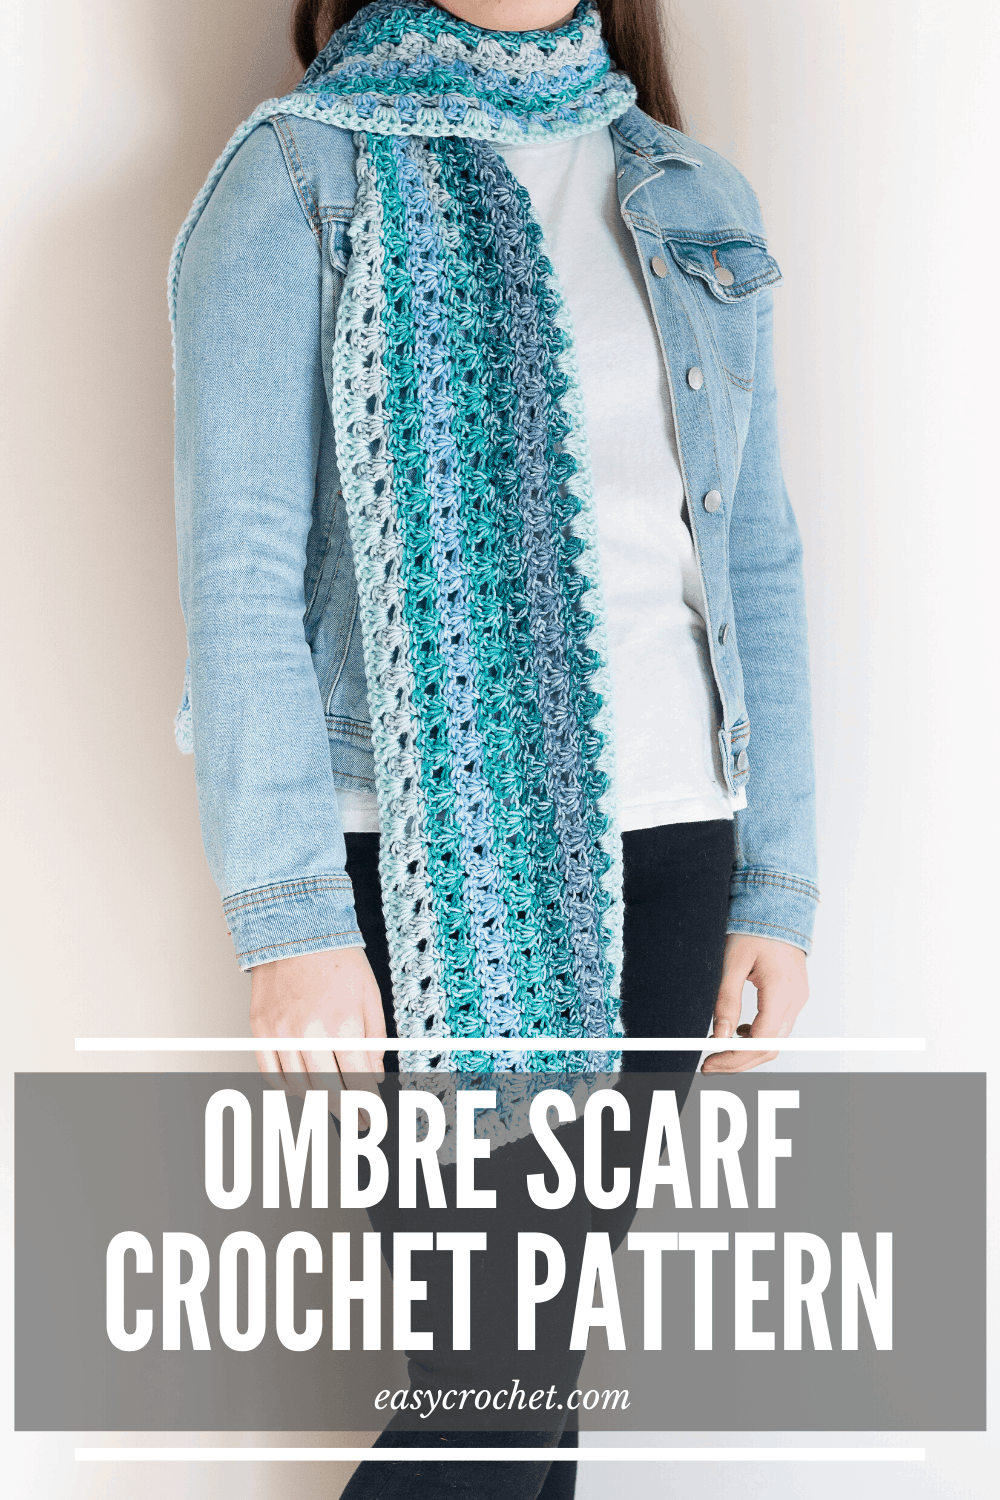 Free Crochet Scarf Pattern for an easy-to-make crochet scarf using Mandala yarn! Find the free pattern at easycrochet.com via @easycrochetcom